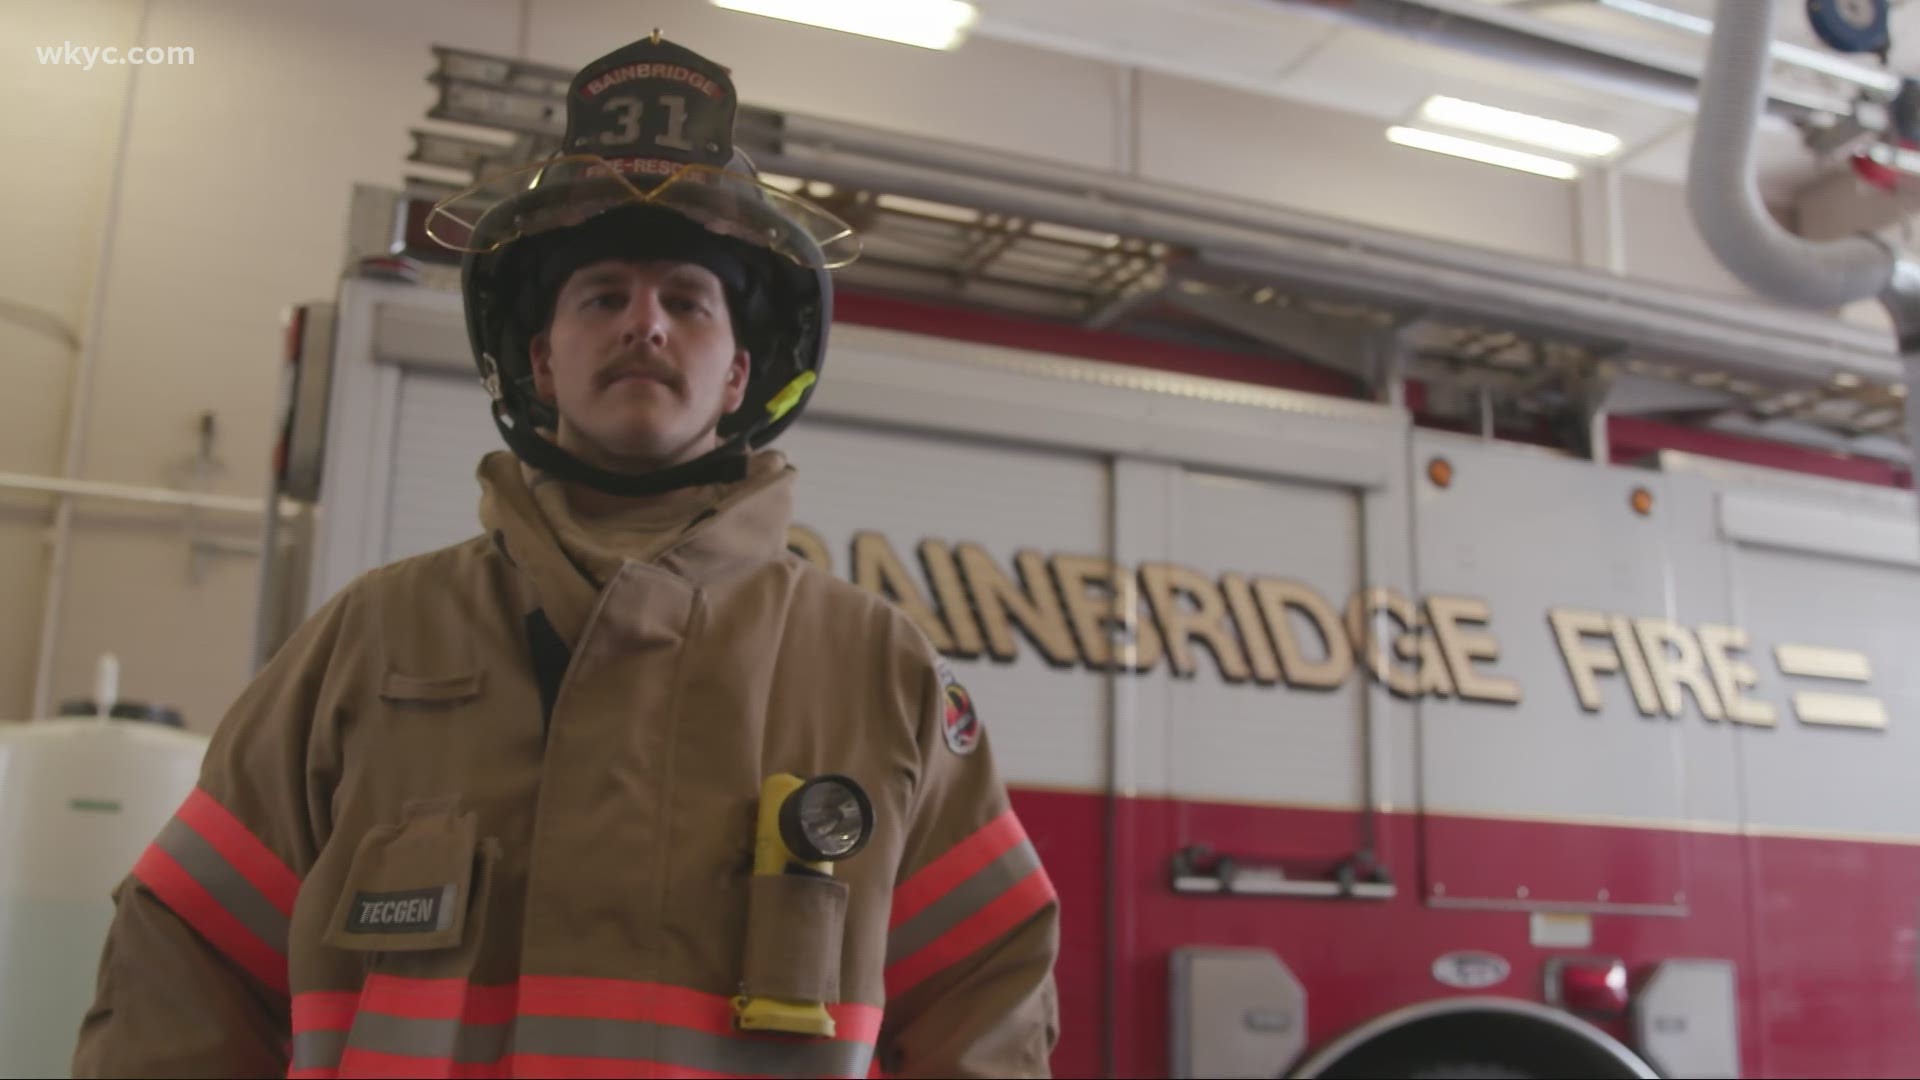 Who helps those who save us? Fire-Dex may be a good answer to that question. The Ohio-based company provides gear for one of the most important jobs in the world.